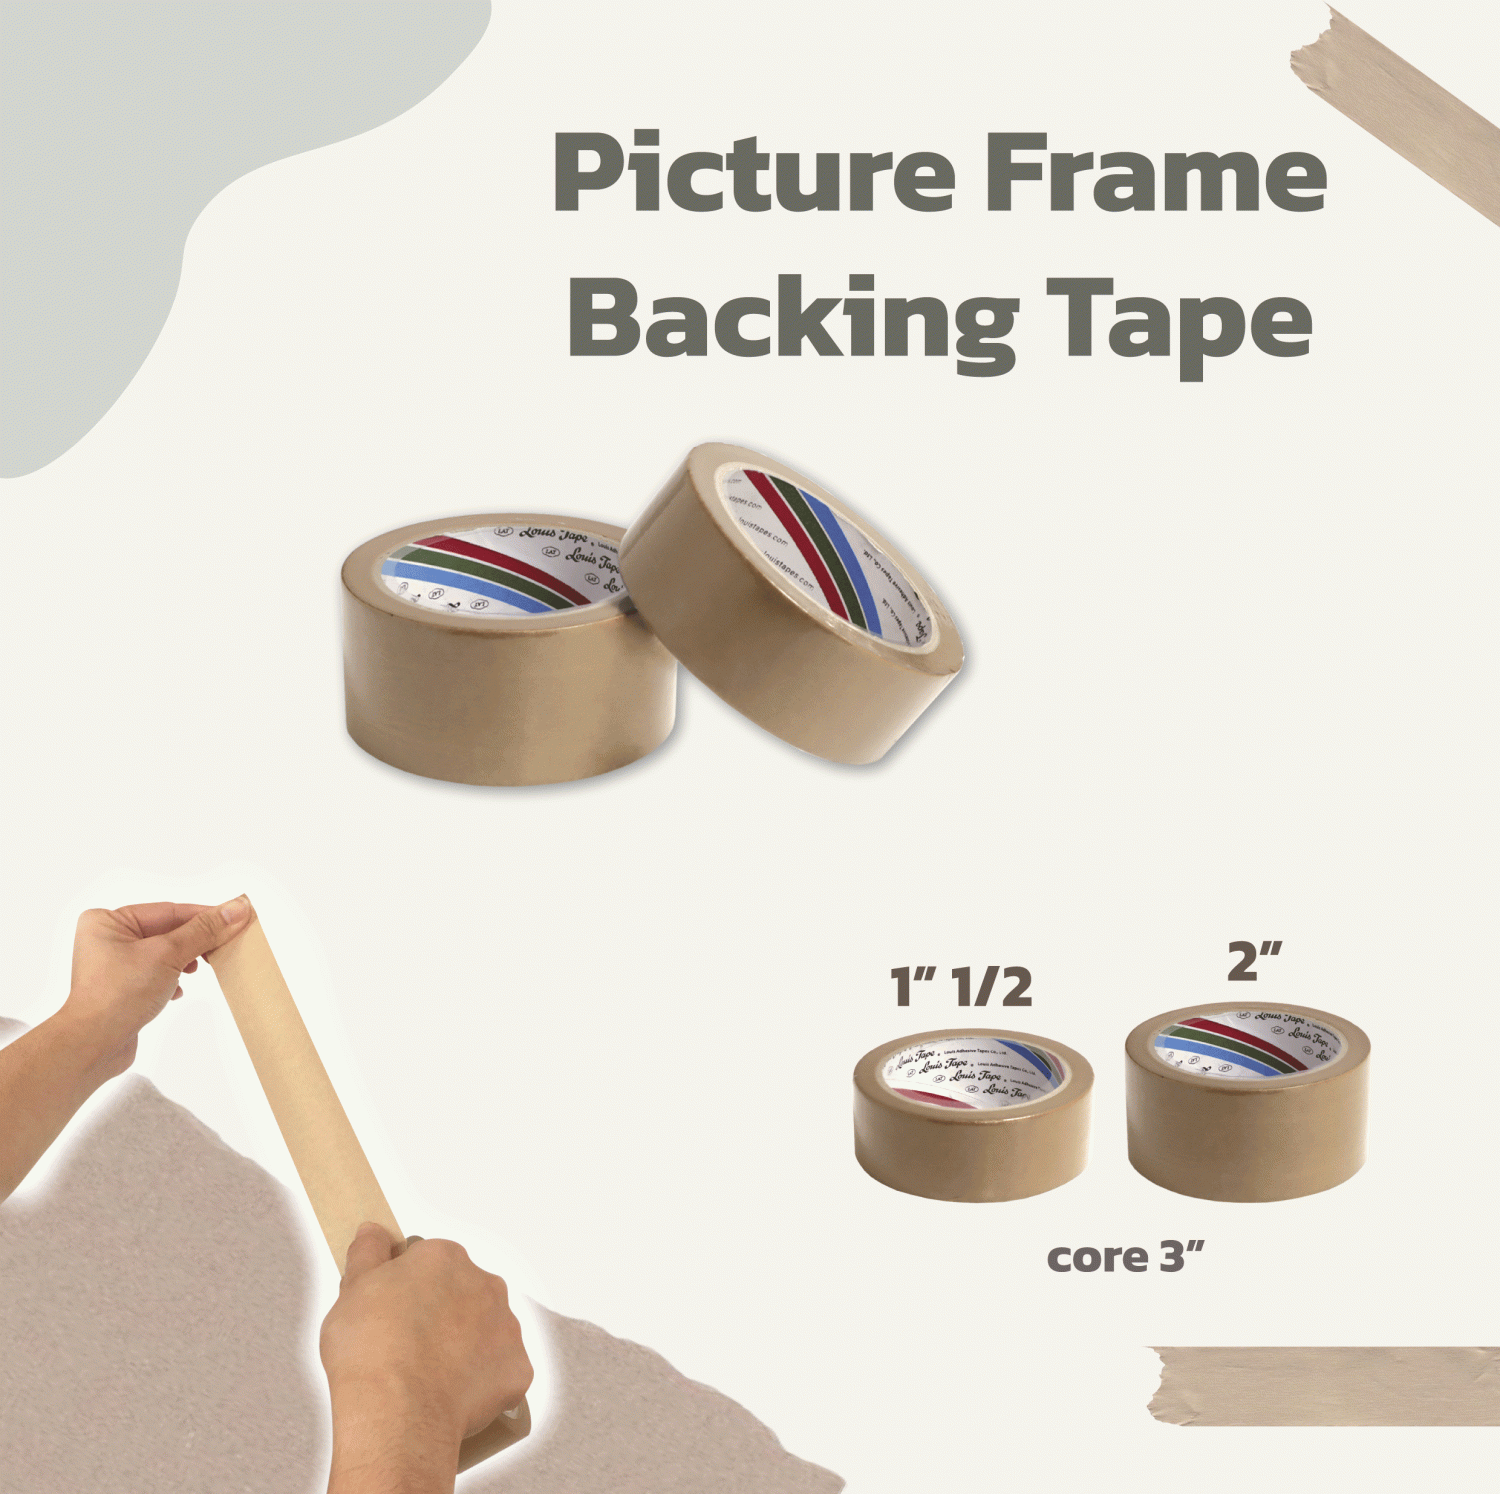 Masking Tape: Types, Applications, Advantages, and Colors